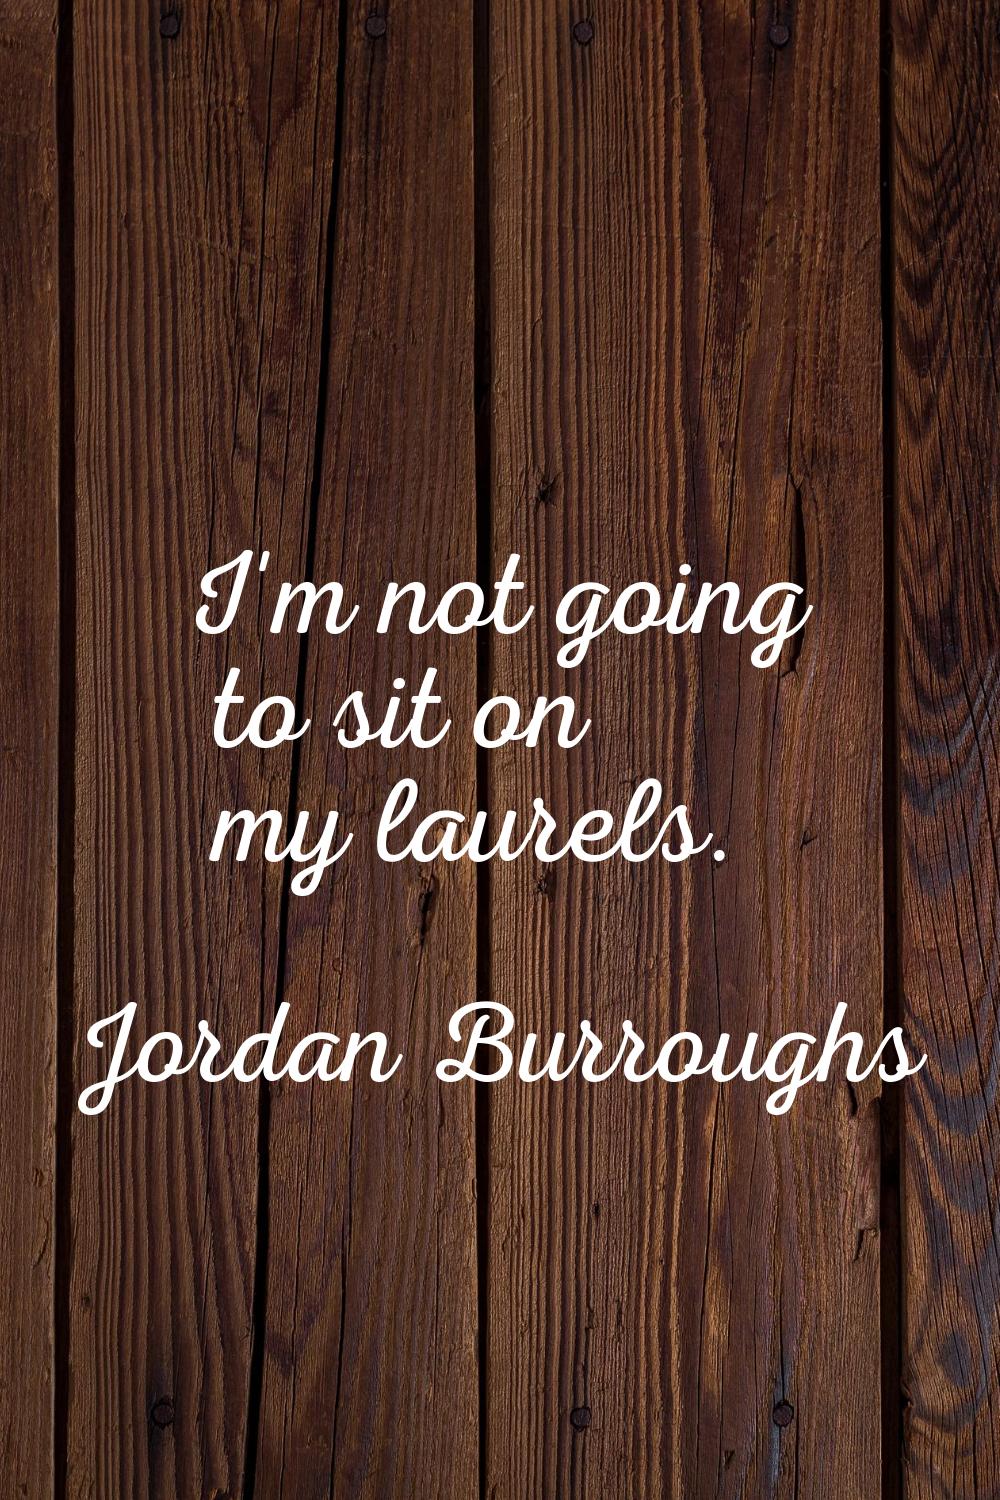 I'm not going to sit on my laurels.